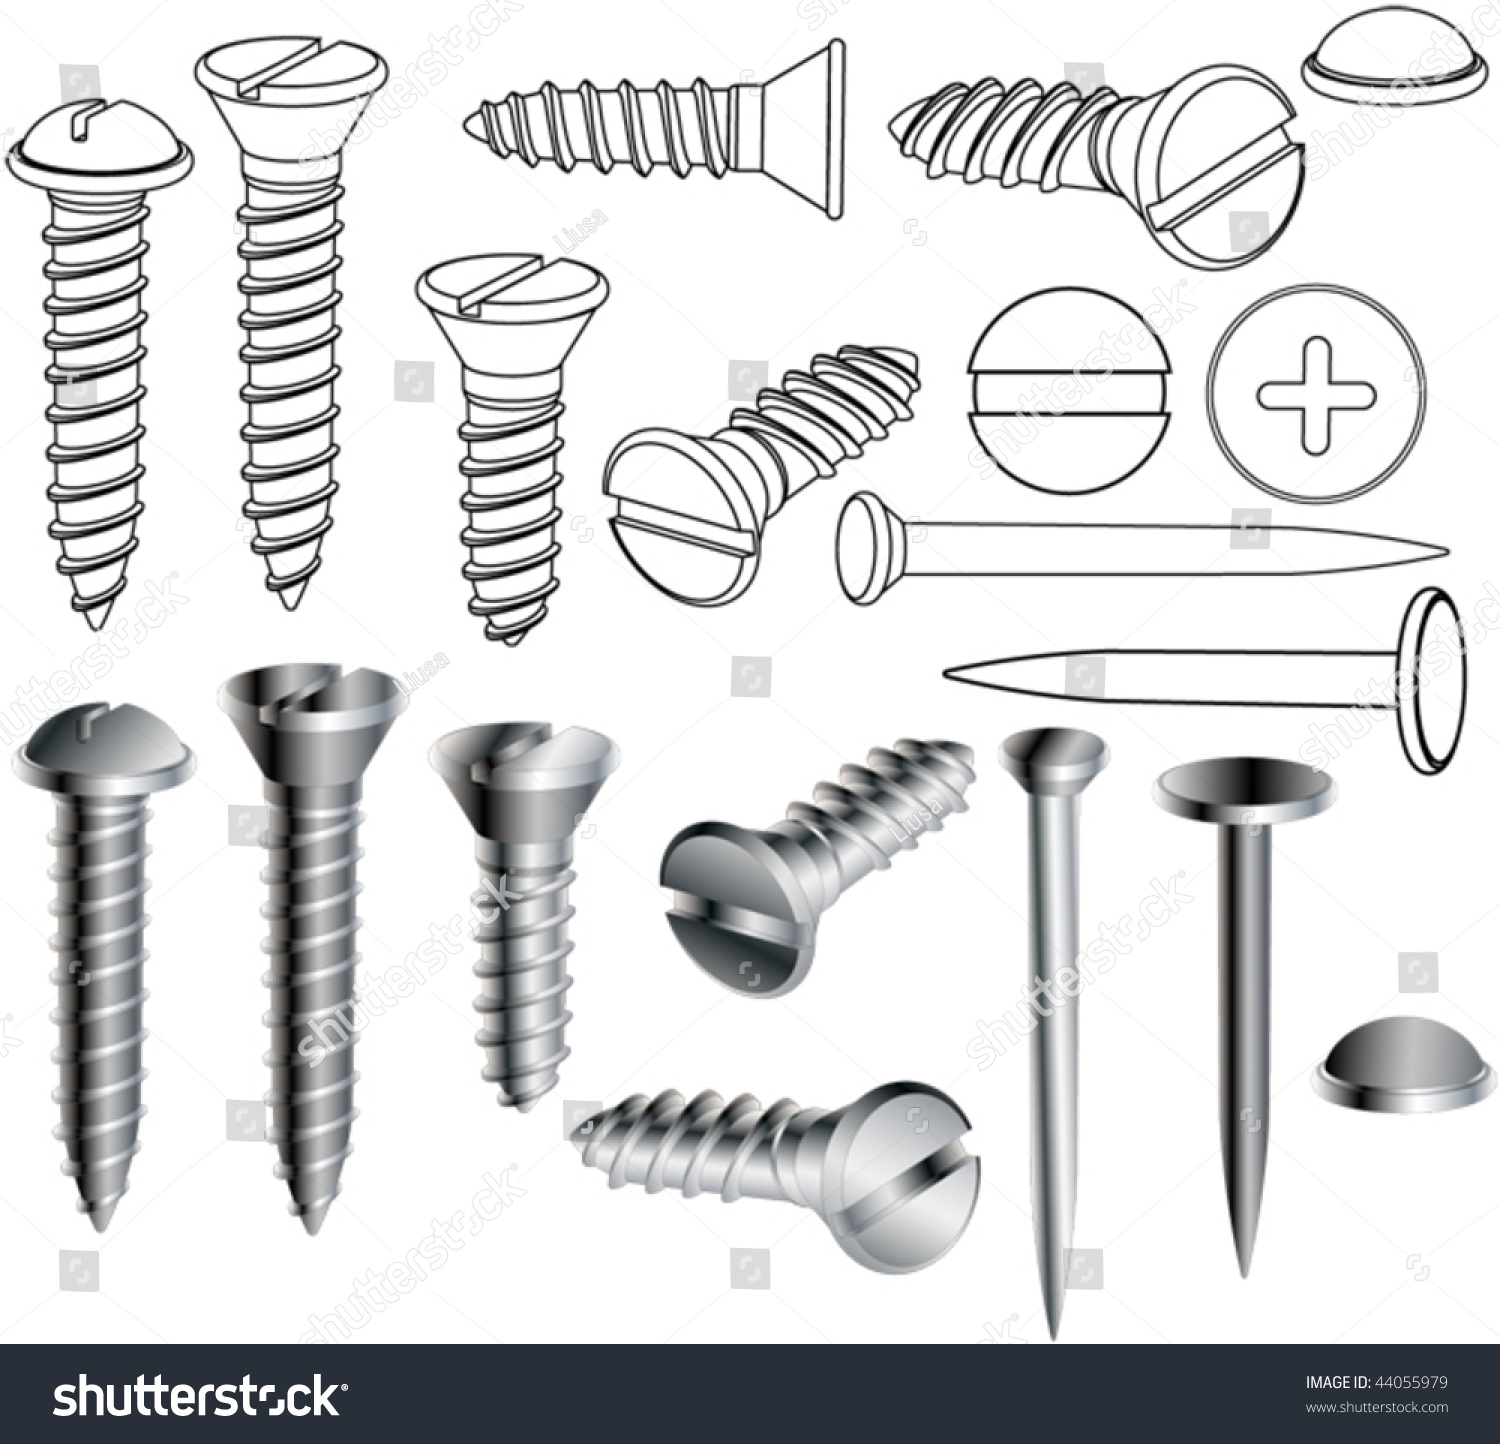 clipart of screws and nails - photo #18